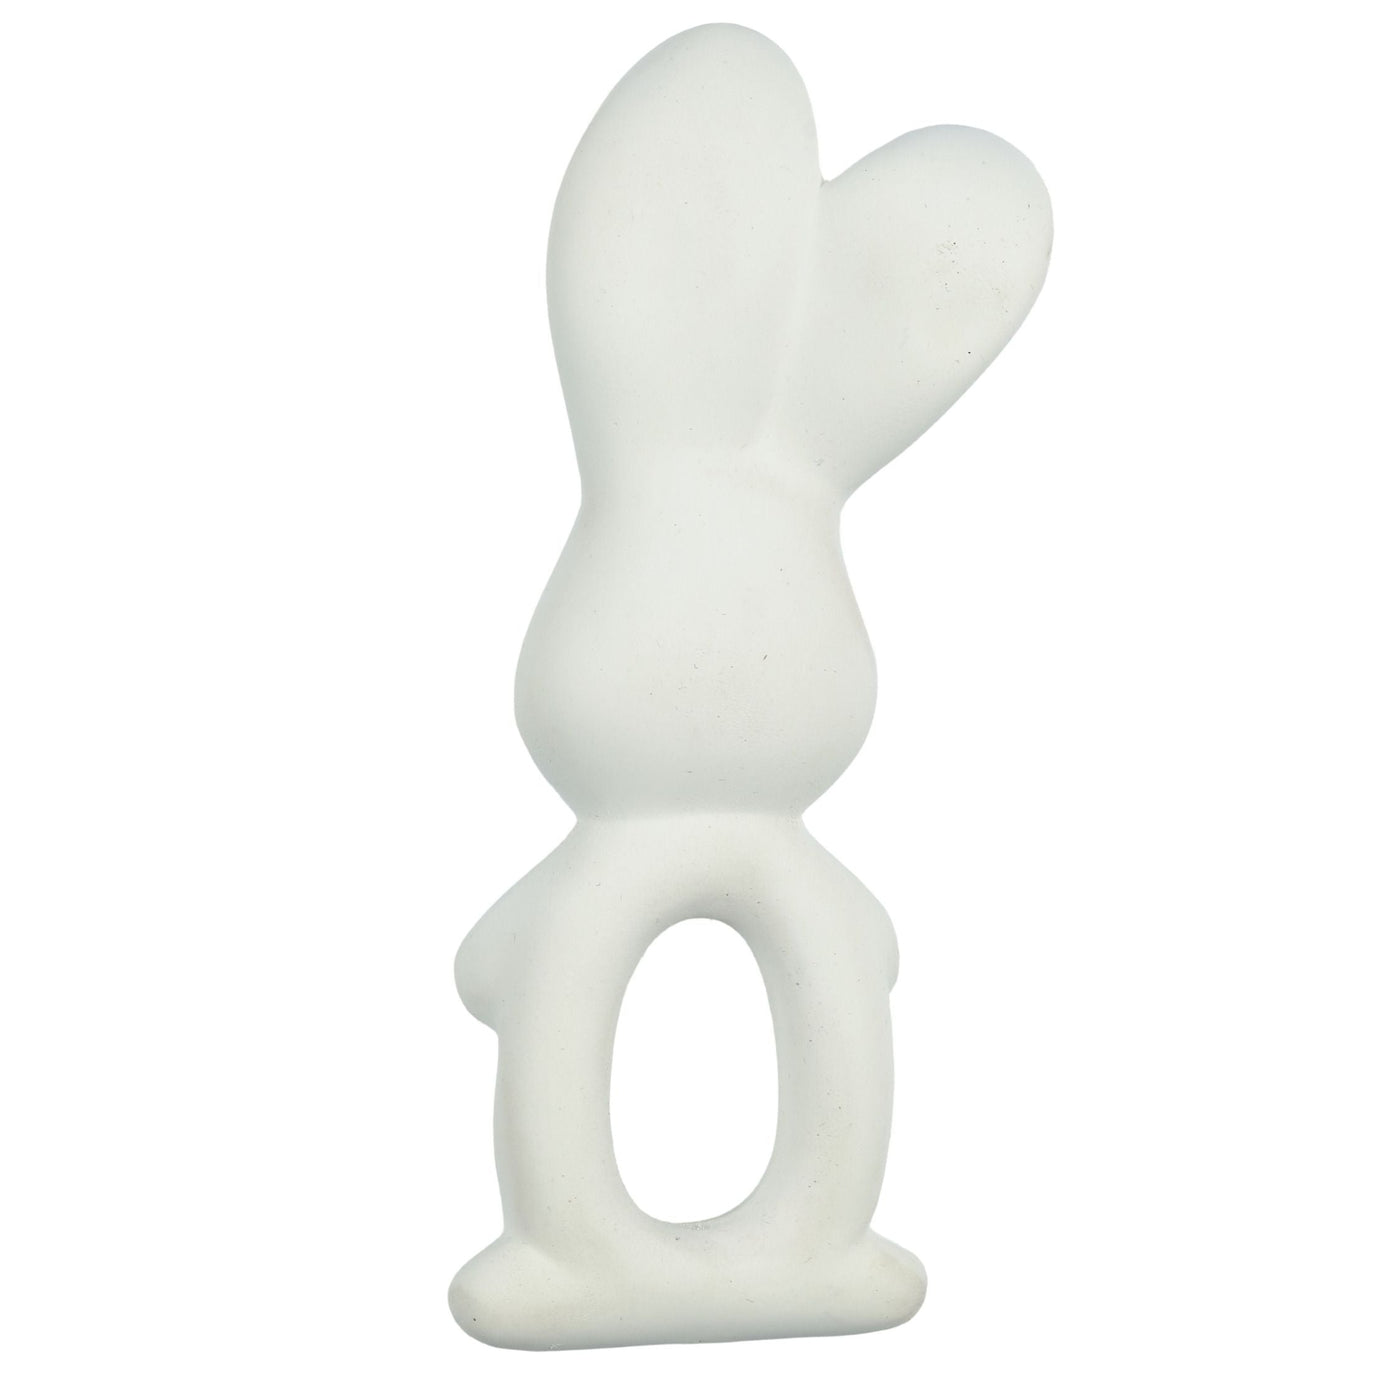 Havah the Bunny - Organic Natural Rubber Teether